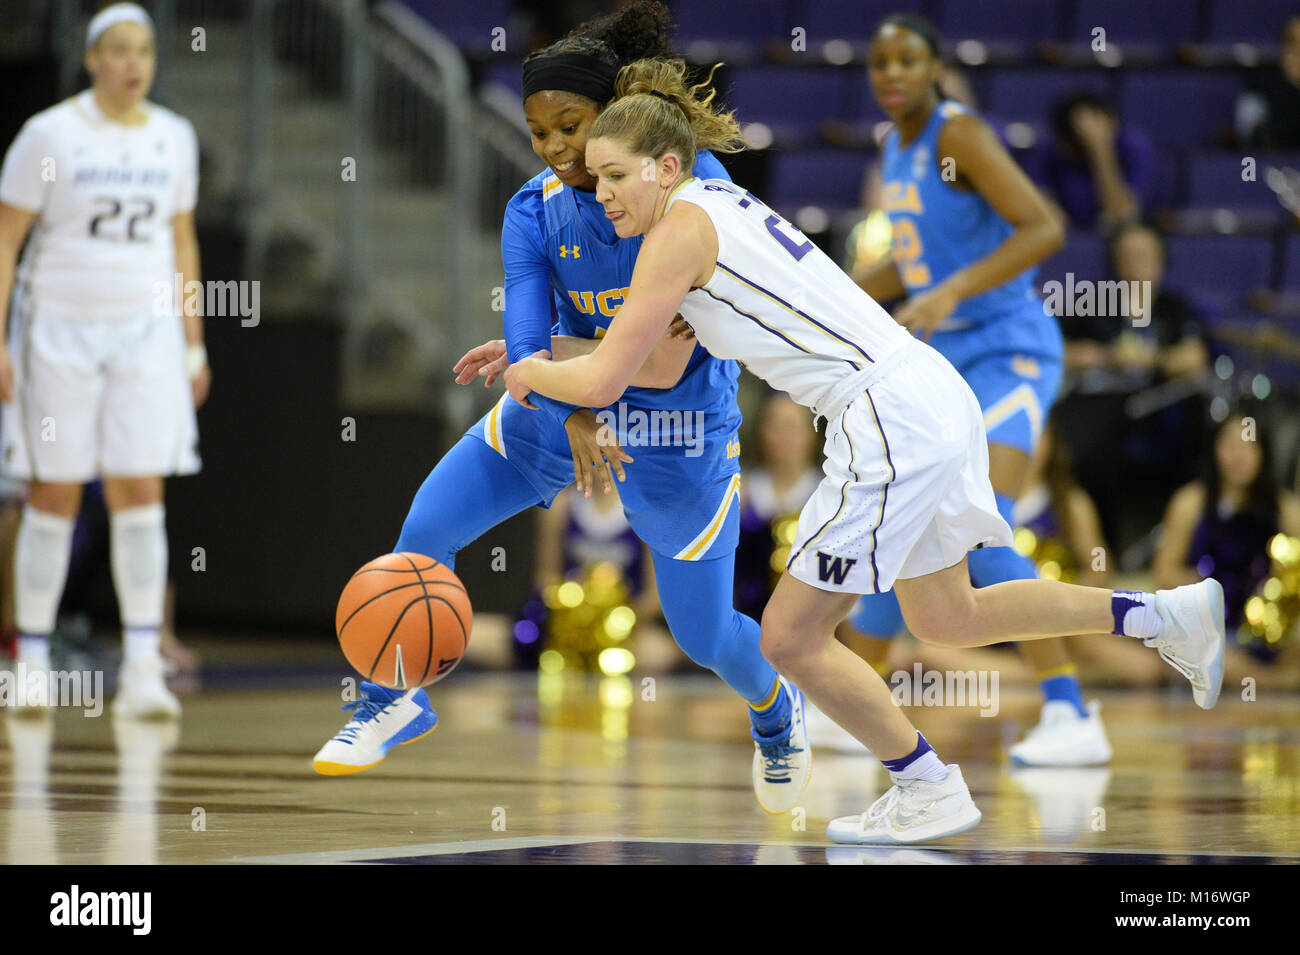 Seattle, WA, USA. 26th Jan, 2018. UW guard Jenna Moser (24) and UCLA's Japreece Dean (24) battle for the loose ball during a PAC12 womens basketball game between the Washington Huskies and UCLA Bruins. The game was played at Hec Ed Pavilion in Seattle, WA. Jeff Halstead/CSM/Alamy Live News Stock Photo